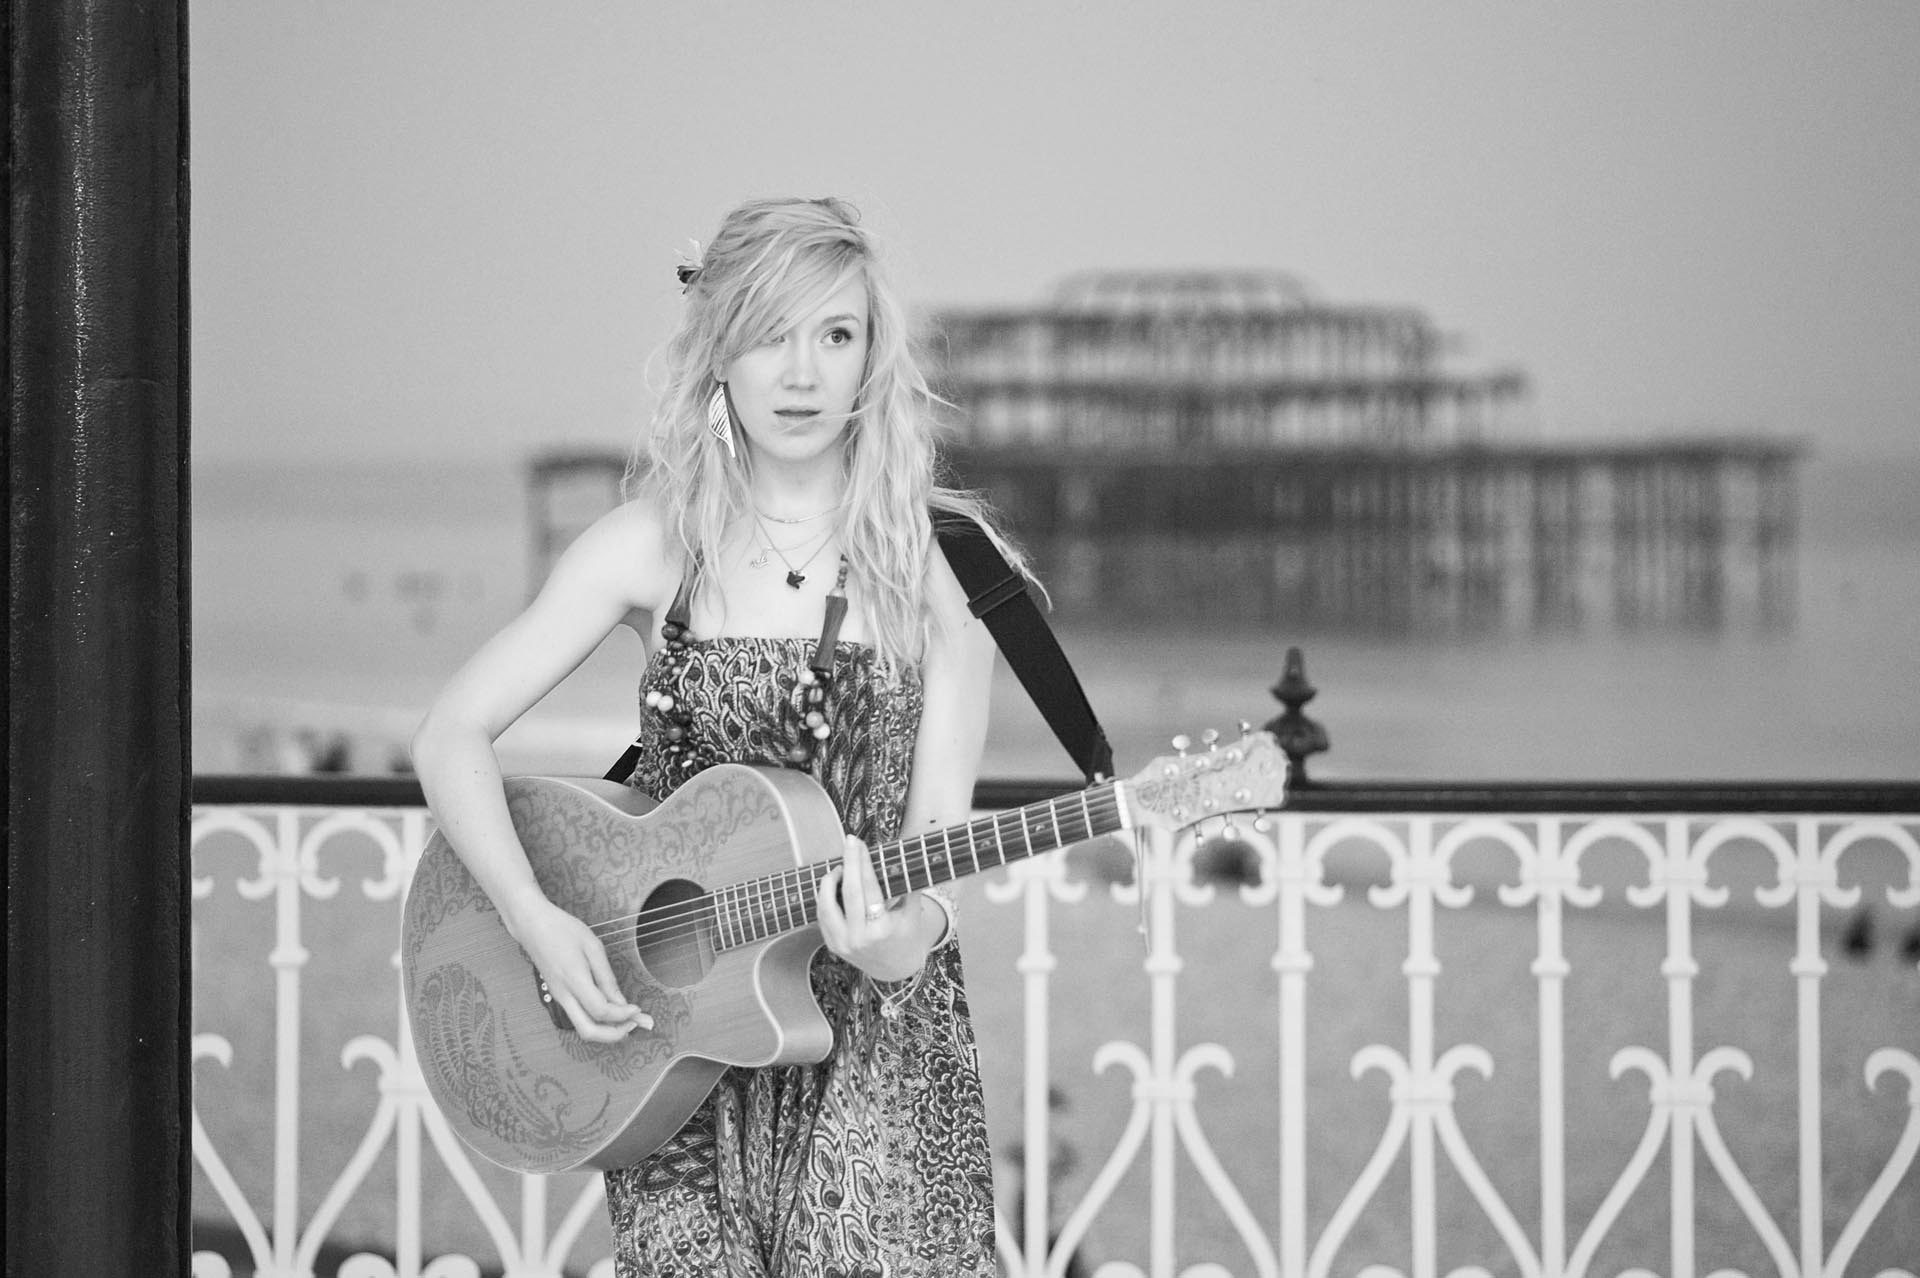 Caitlin stubbs brighton bandstand May 2012